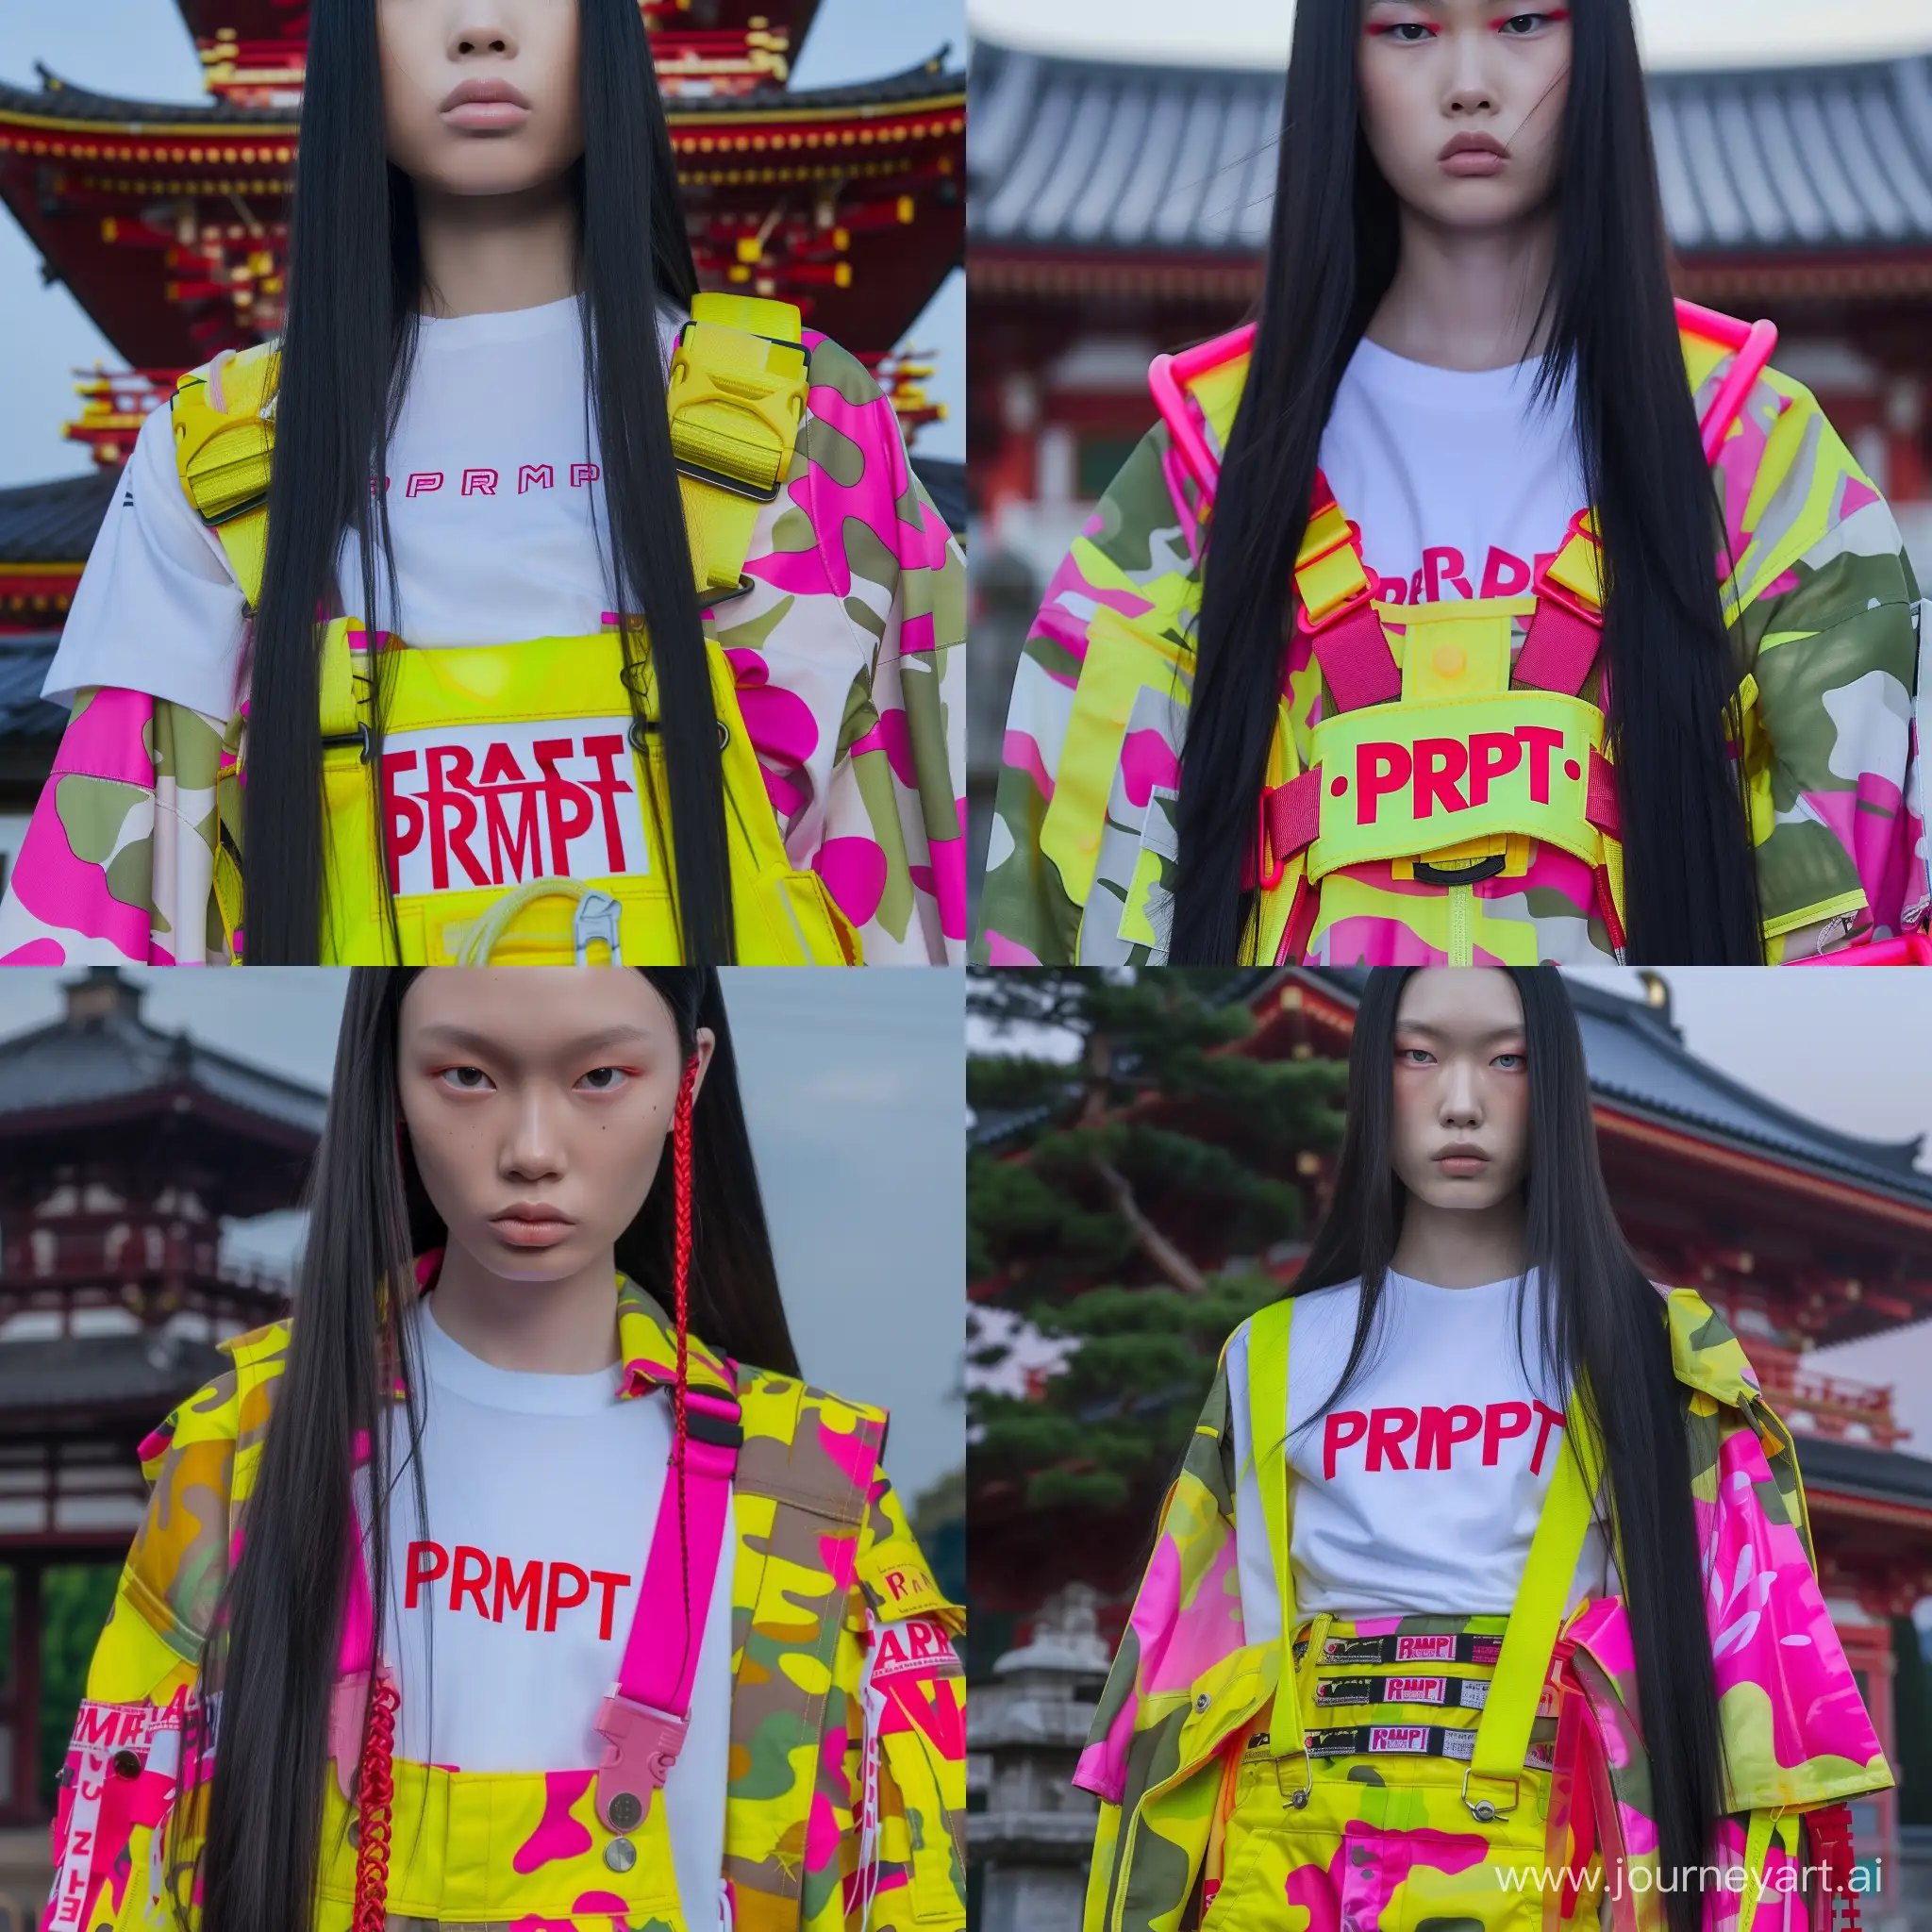 Intense-Asian-Editorial-Fashion-with-Neon-Yellow-and-Pink-Camo-Overalls-at-Japanese-Temple